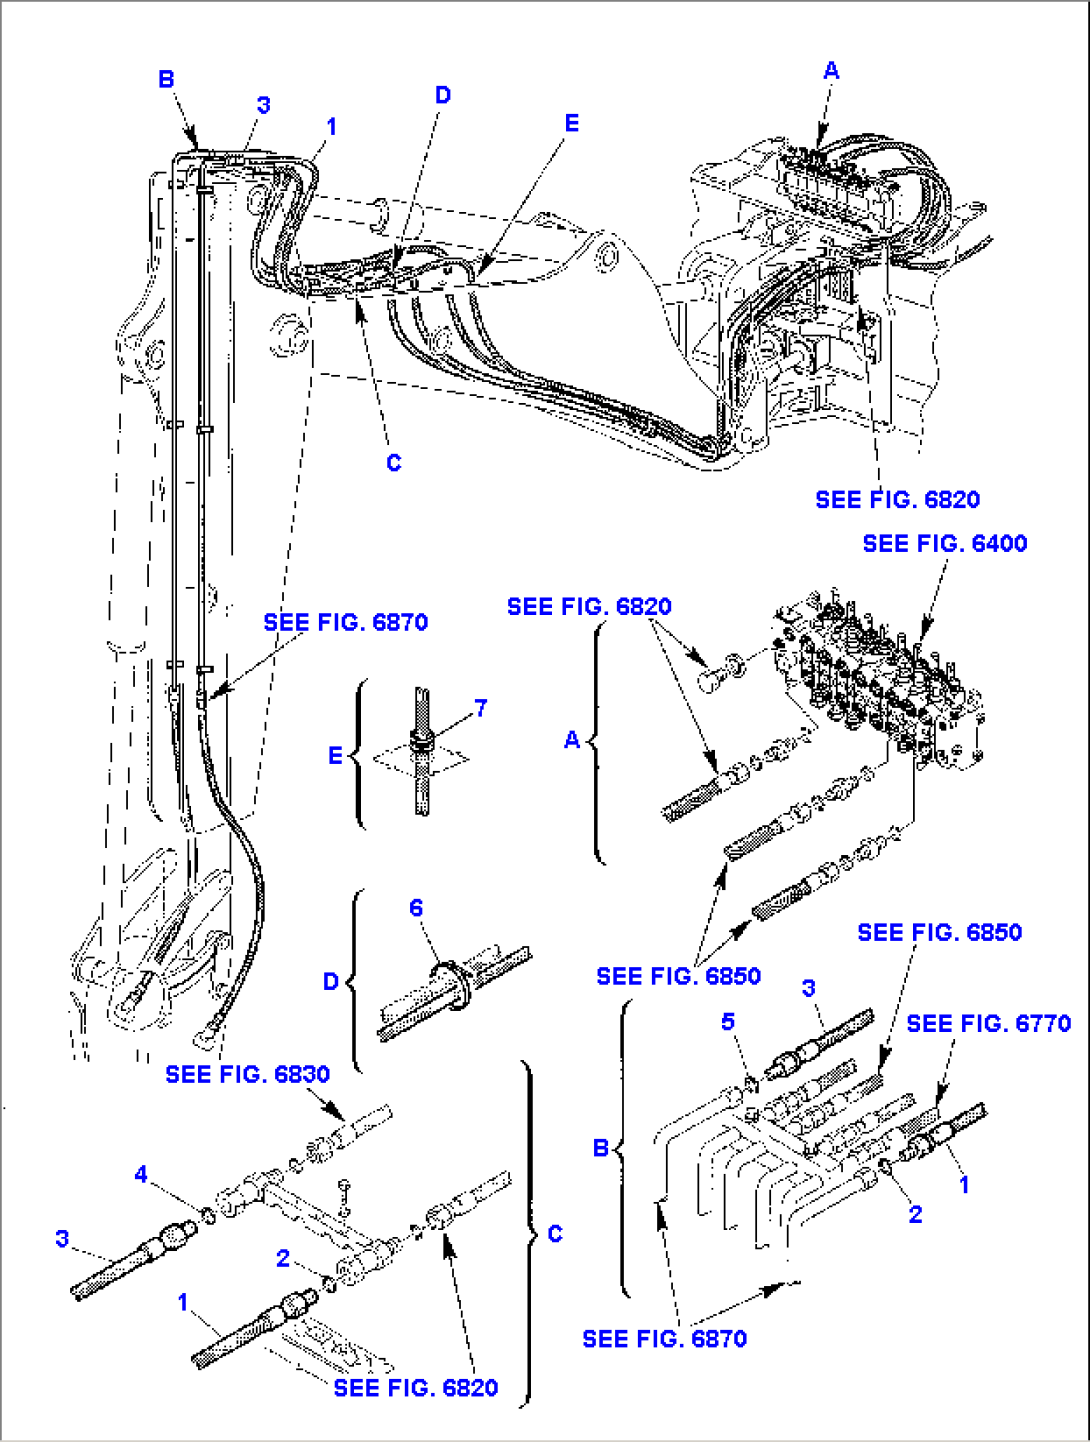 HAMMER HYDRAULIC PIPING WITH JIG ARM (1/2)